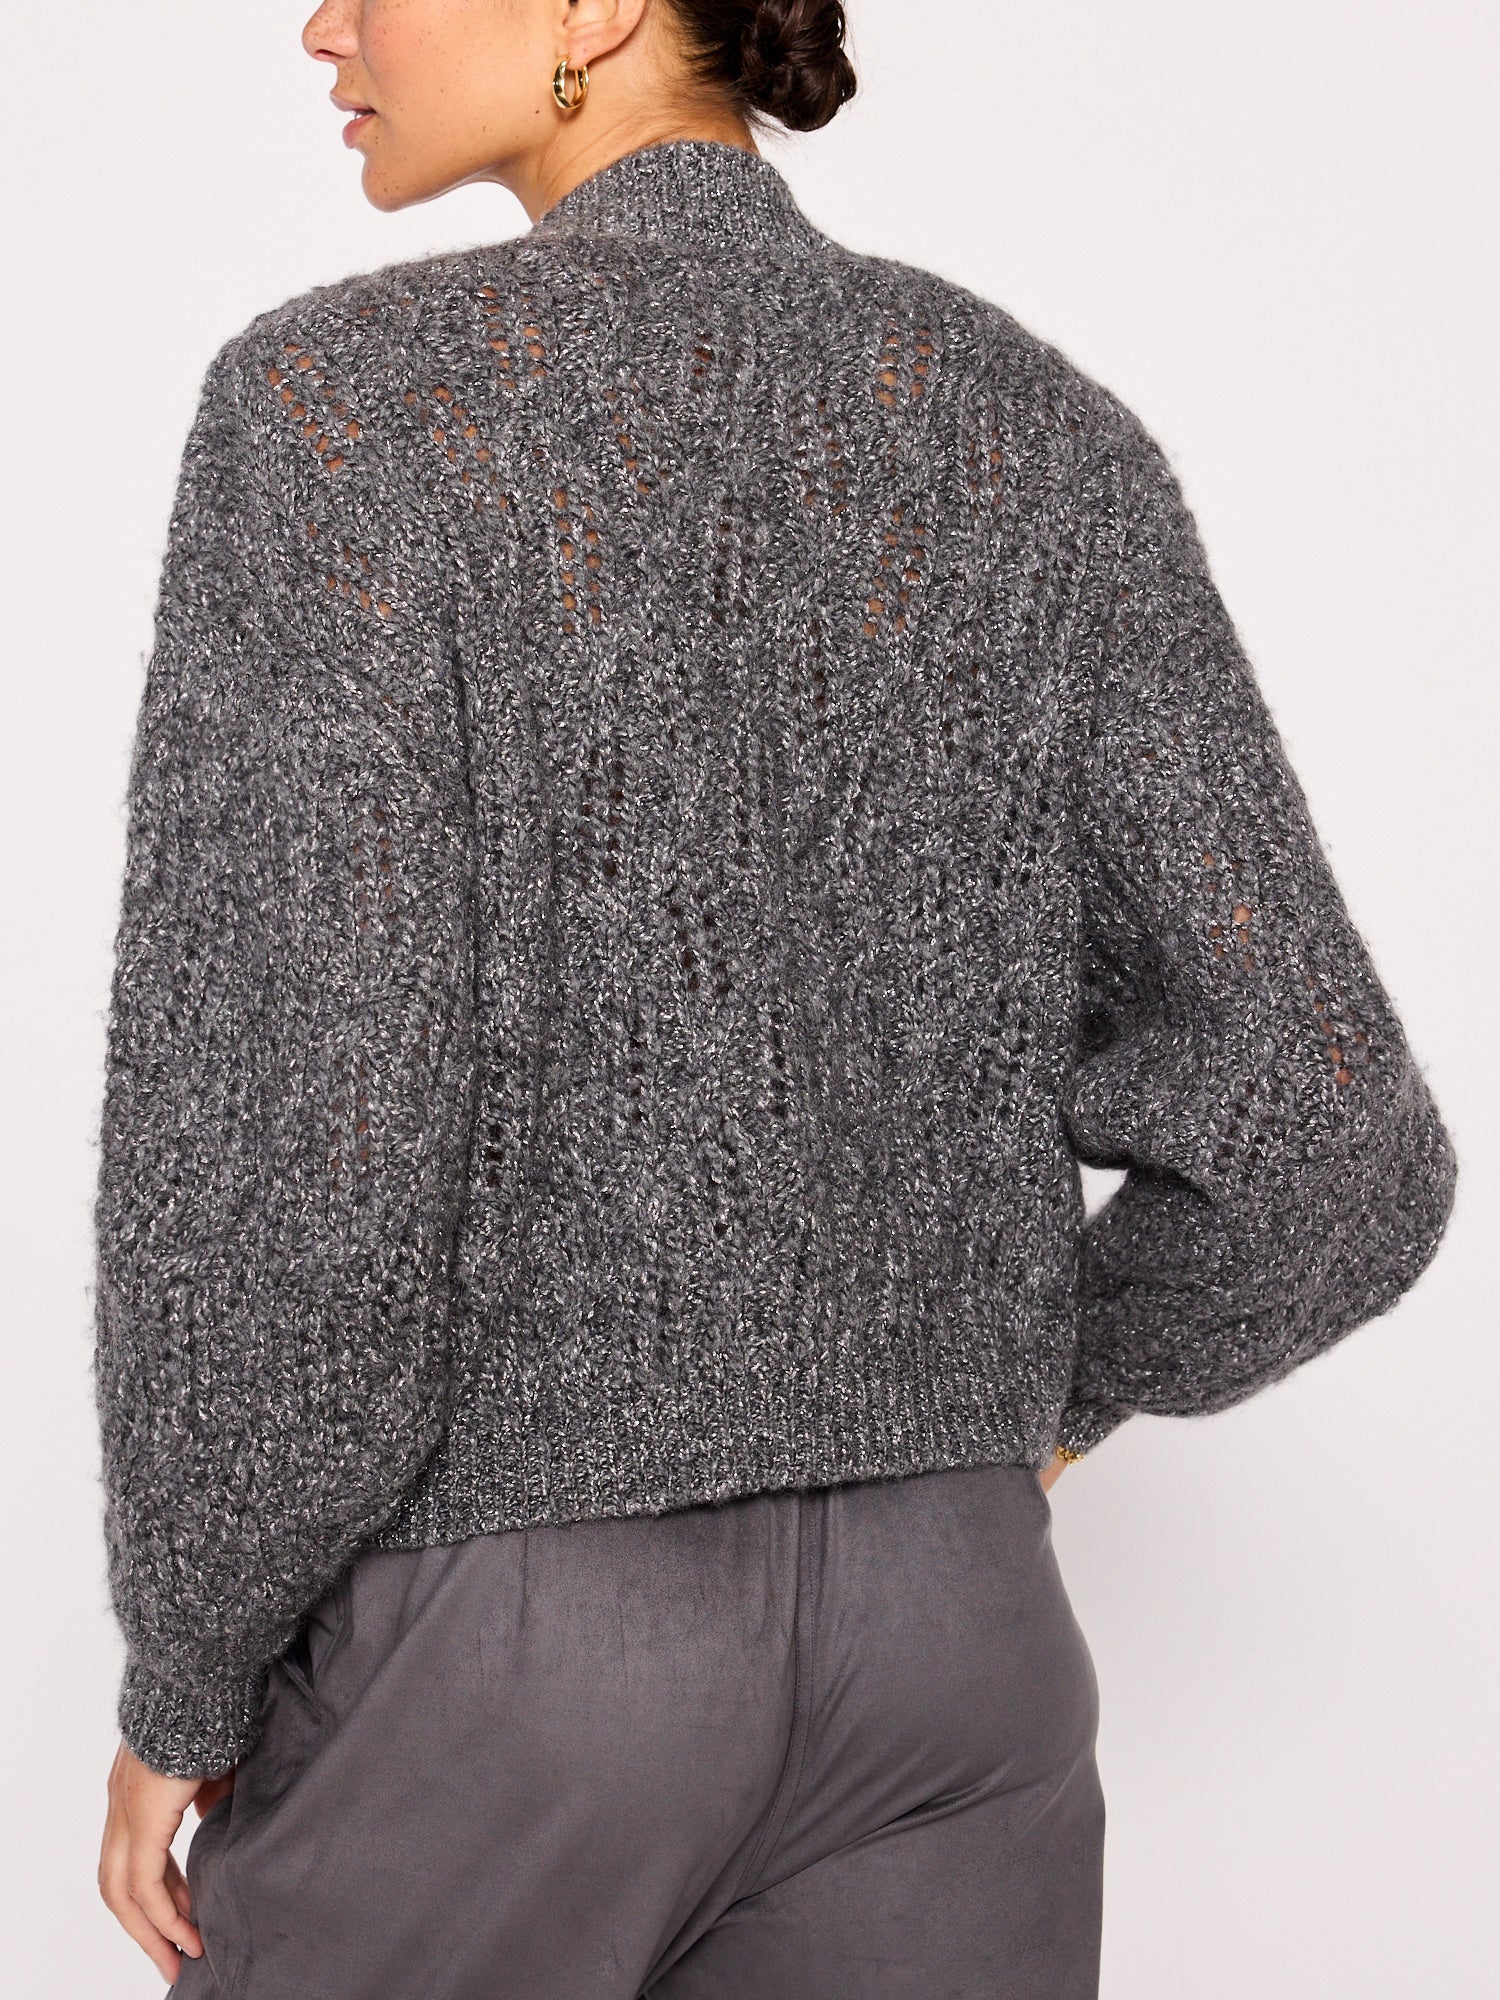 Restoin grey with metallic crewneck sweater back view